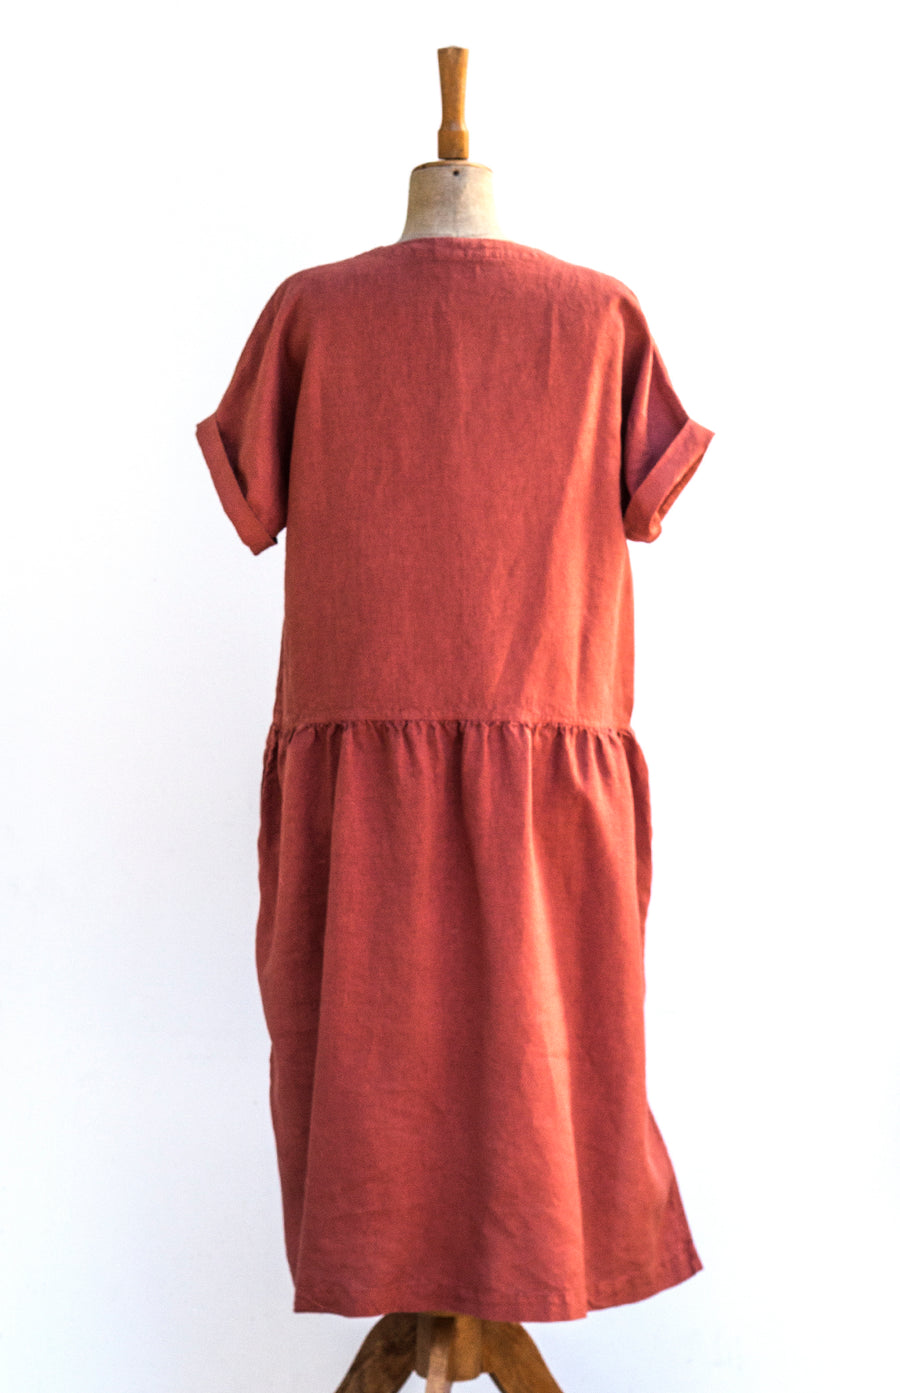 Autumn country dress in the shade of Redwood